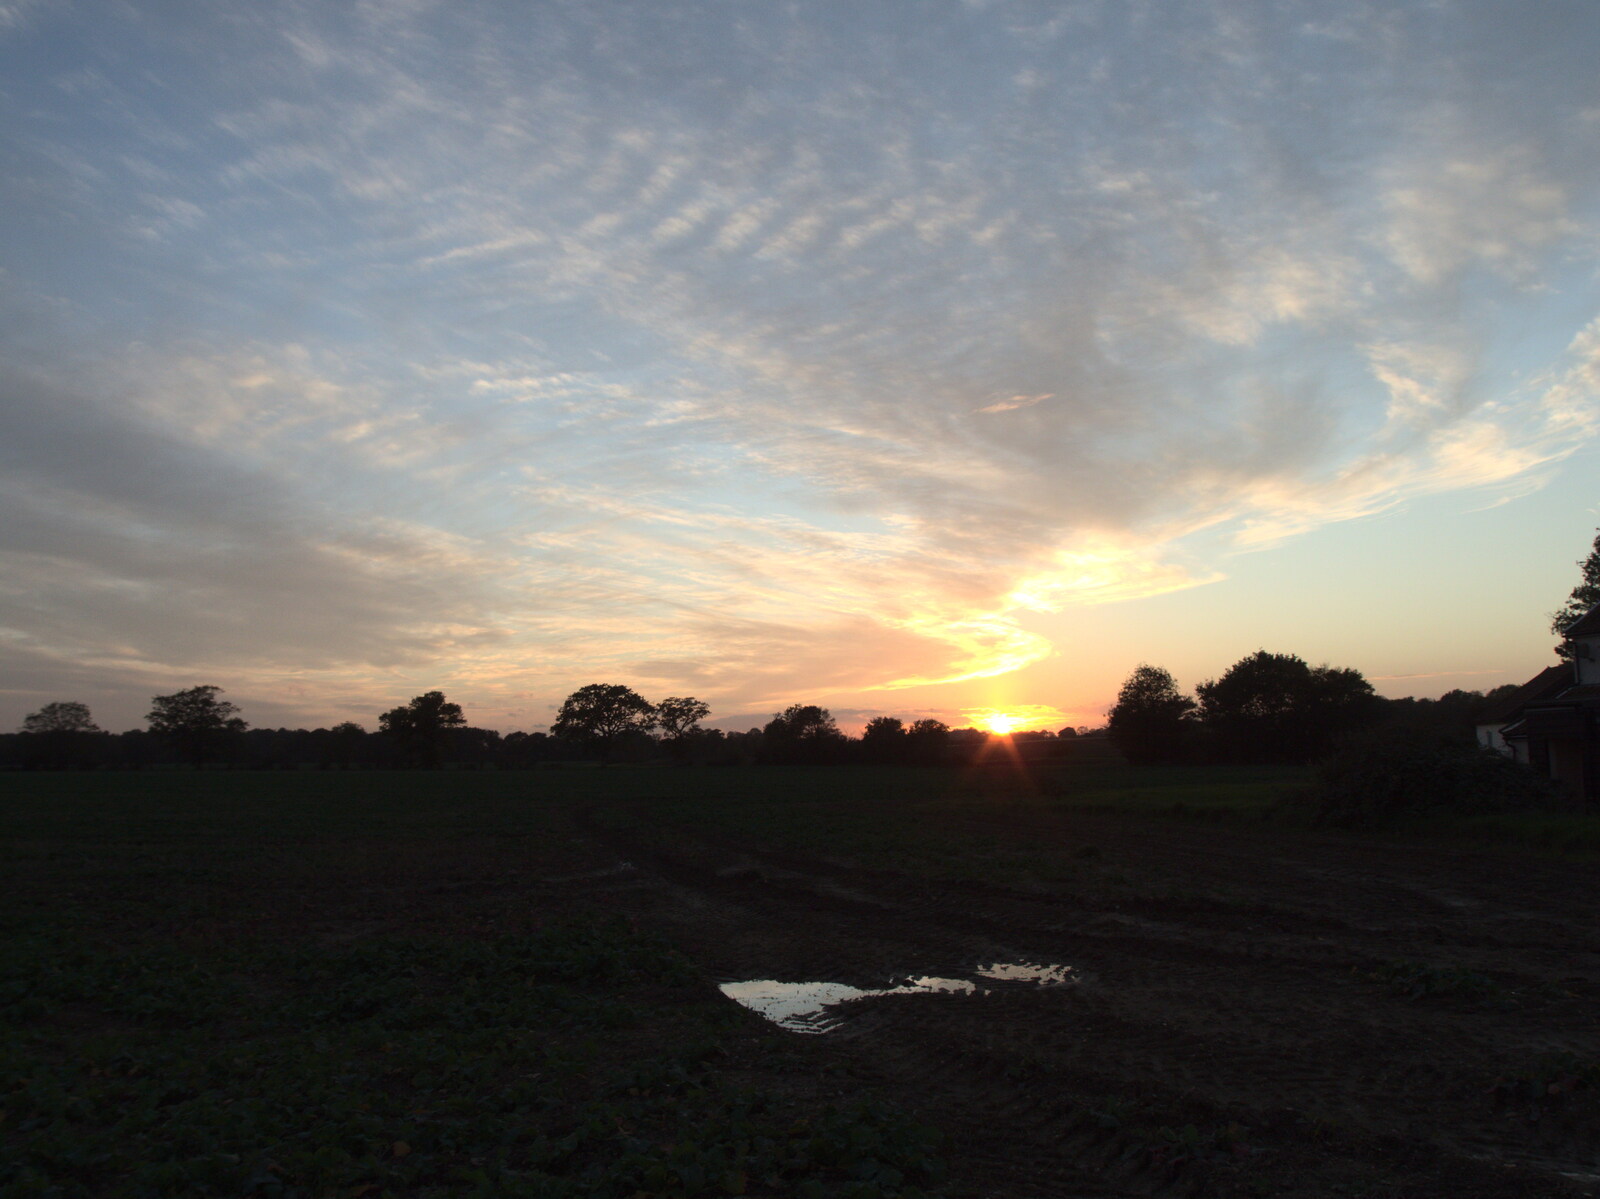 A sunset between Mellis and Thornham from Pre-Lockdown in Station 119, Eye, Suffolk - 4th November 2020